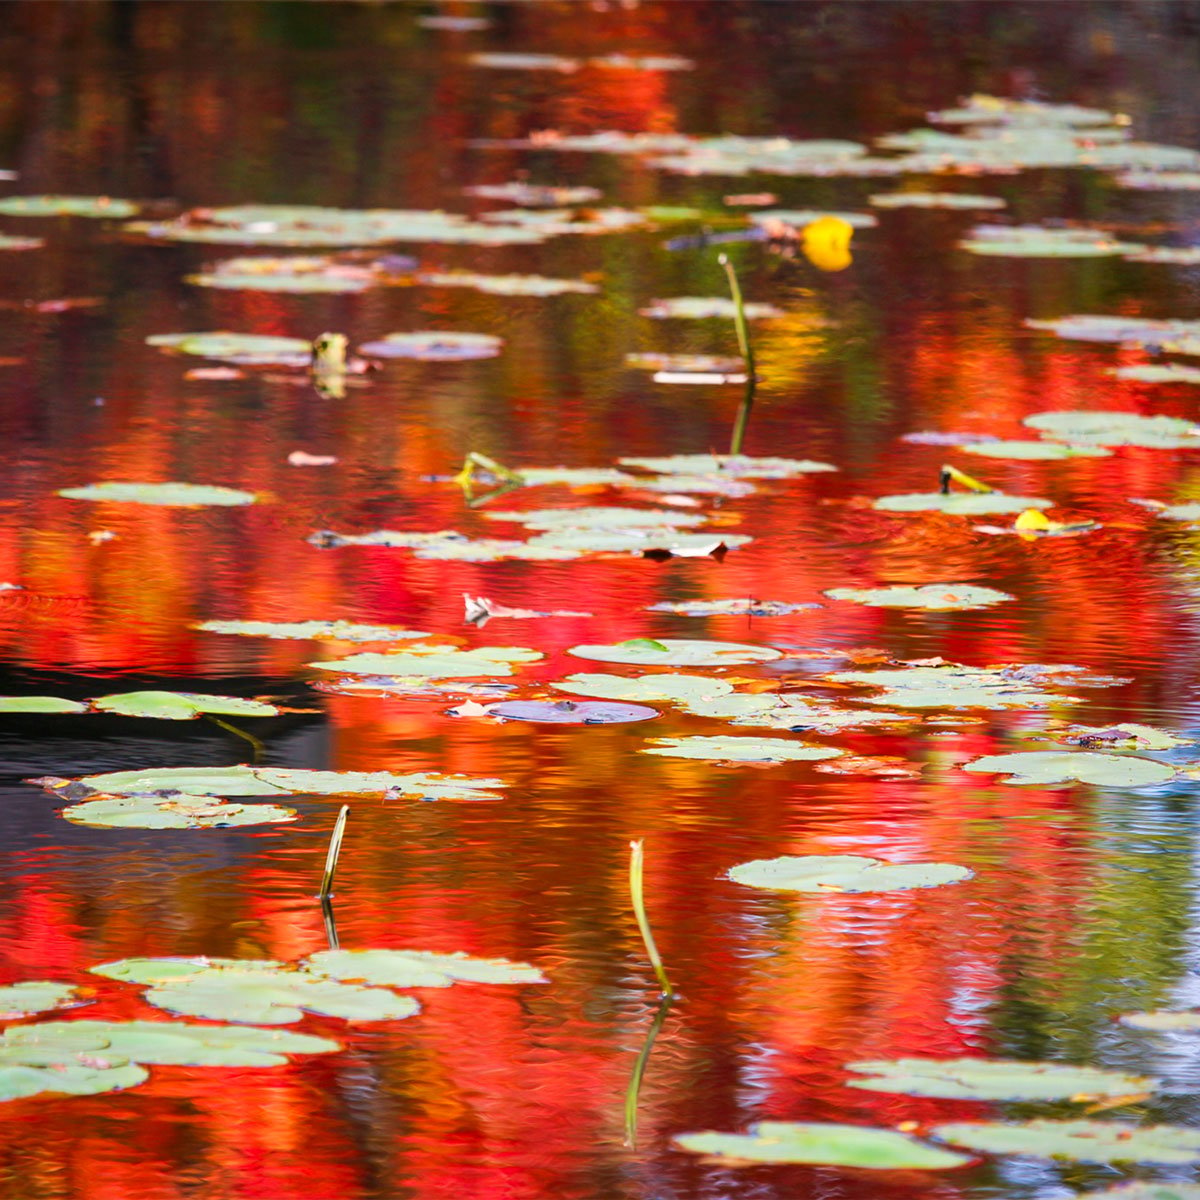 Lily pool with colorful reflections from autumn trees